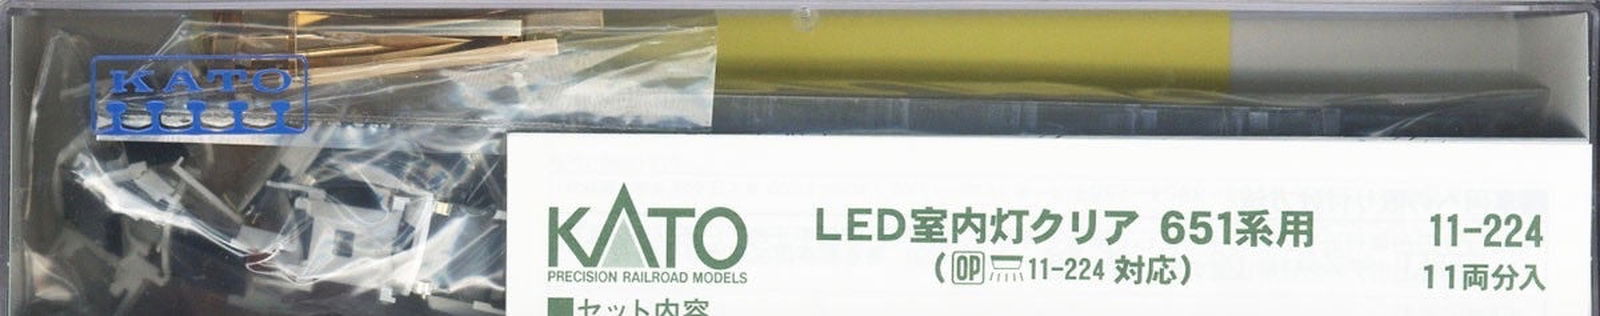 KATO 11-224 LED Interior Lighting Kit Clear for Series 651 (for 11 Ca - BanzaiHobby